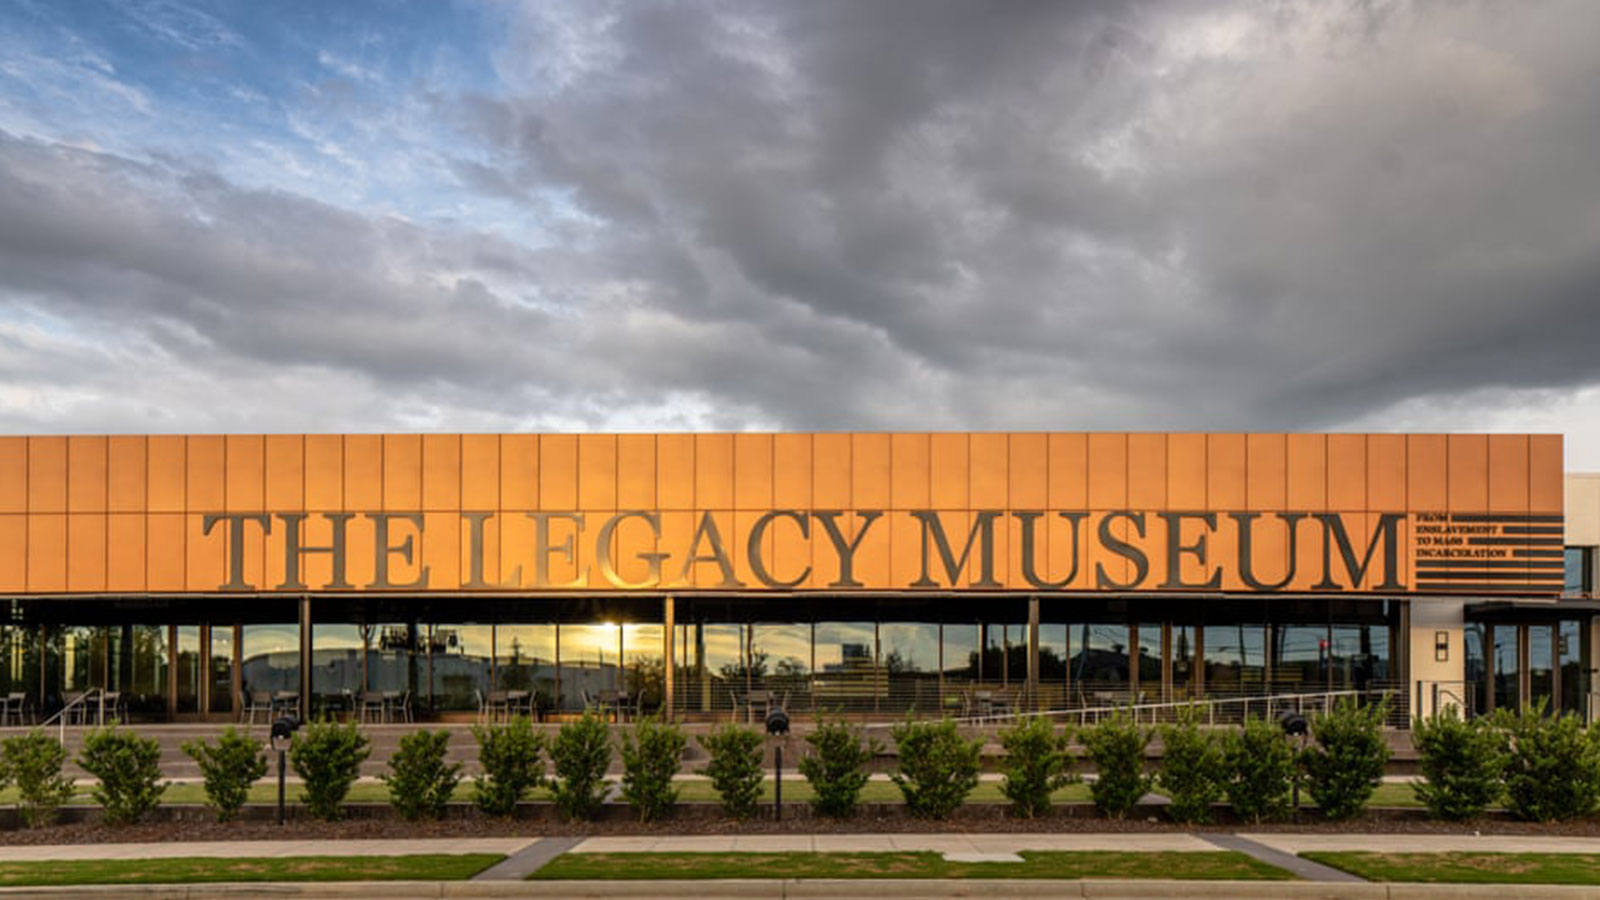 The new exhibition is housed on the exact location of a former slave warehouse where Black people were held in bondage, forced to process cotton and held in pens in preparation for being sold. 